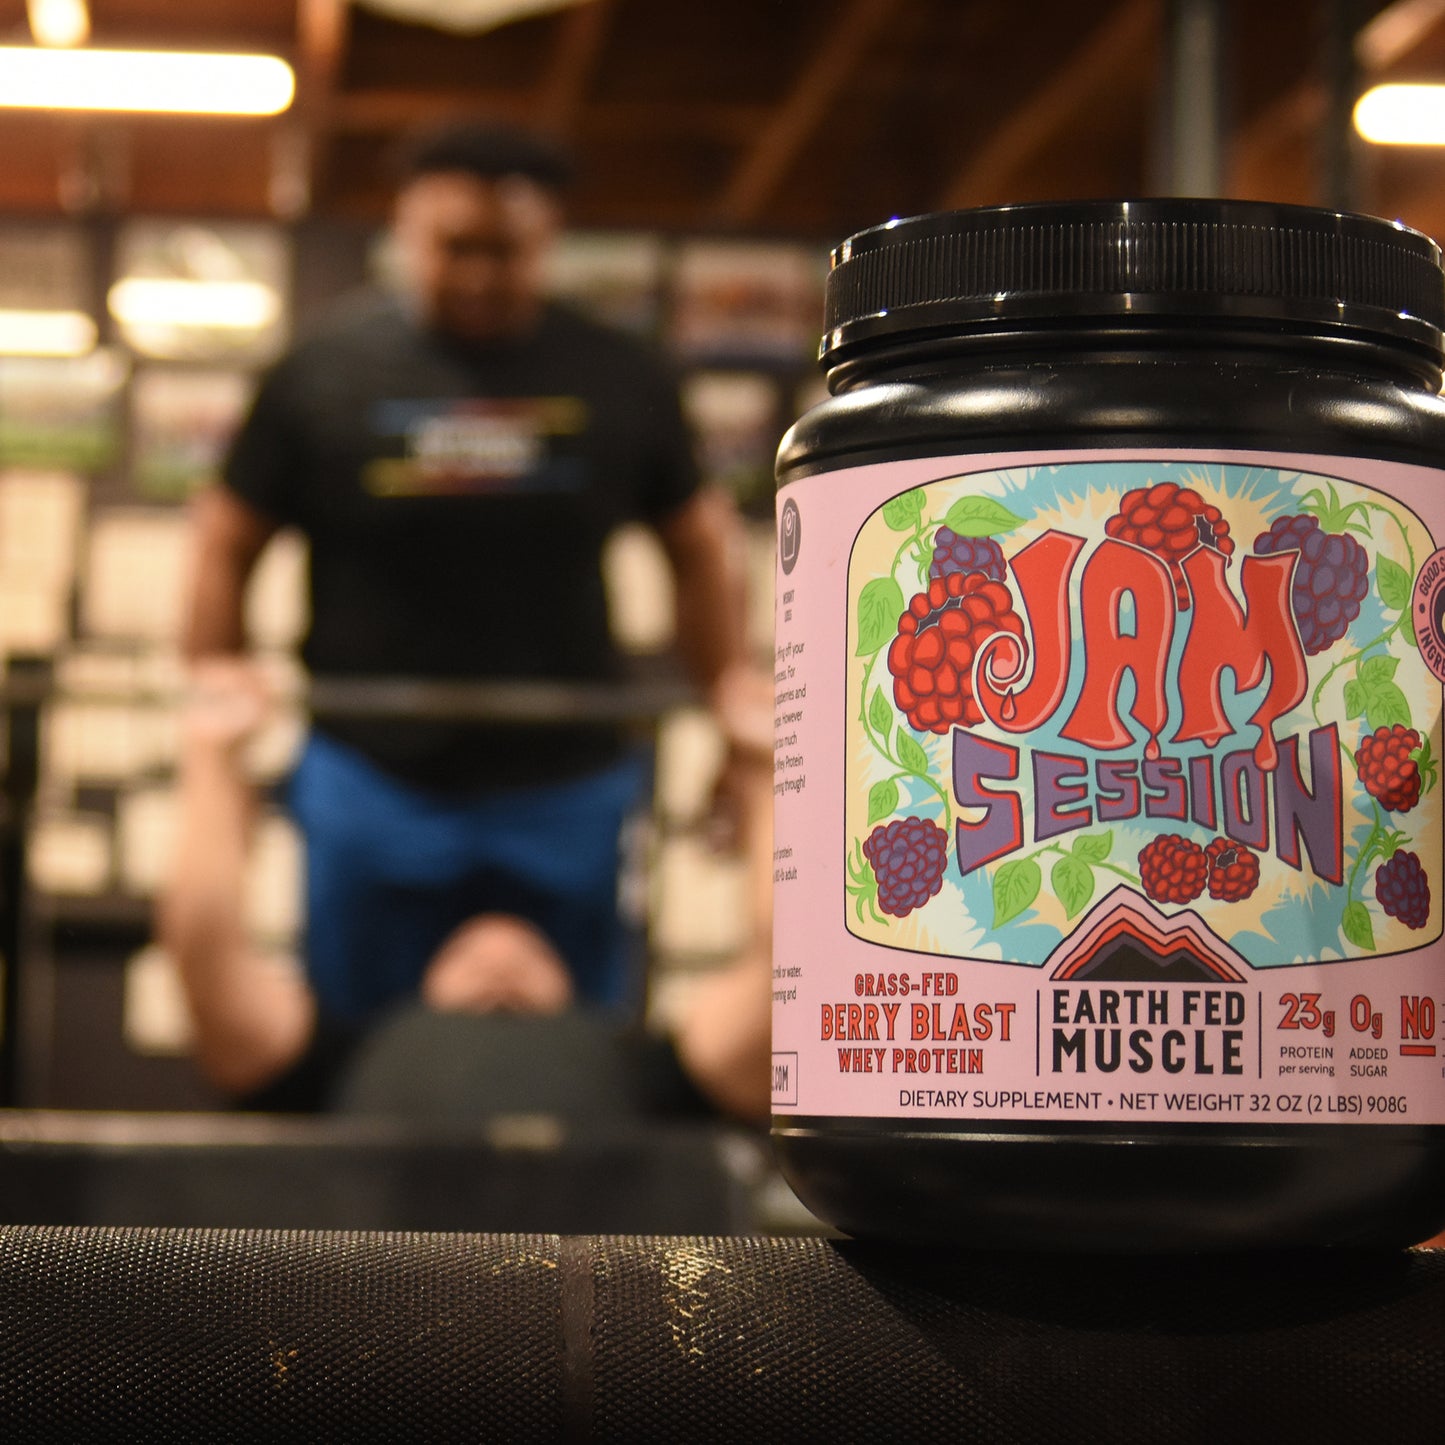 Jam Session Berry Grass-Fed Whey Protein